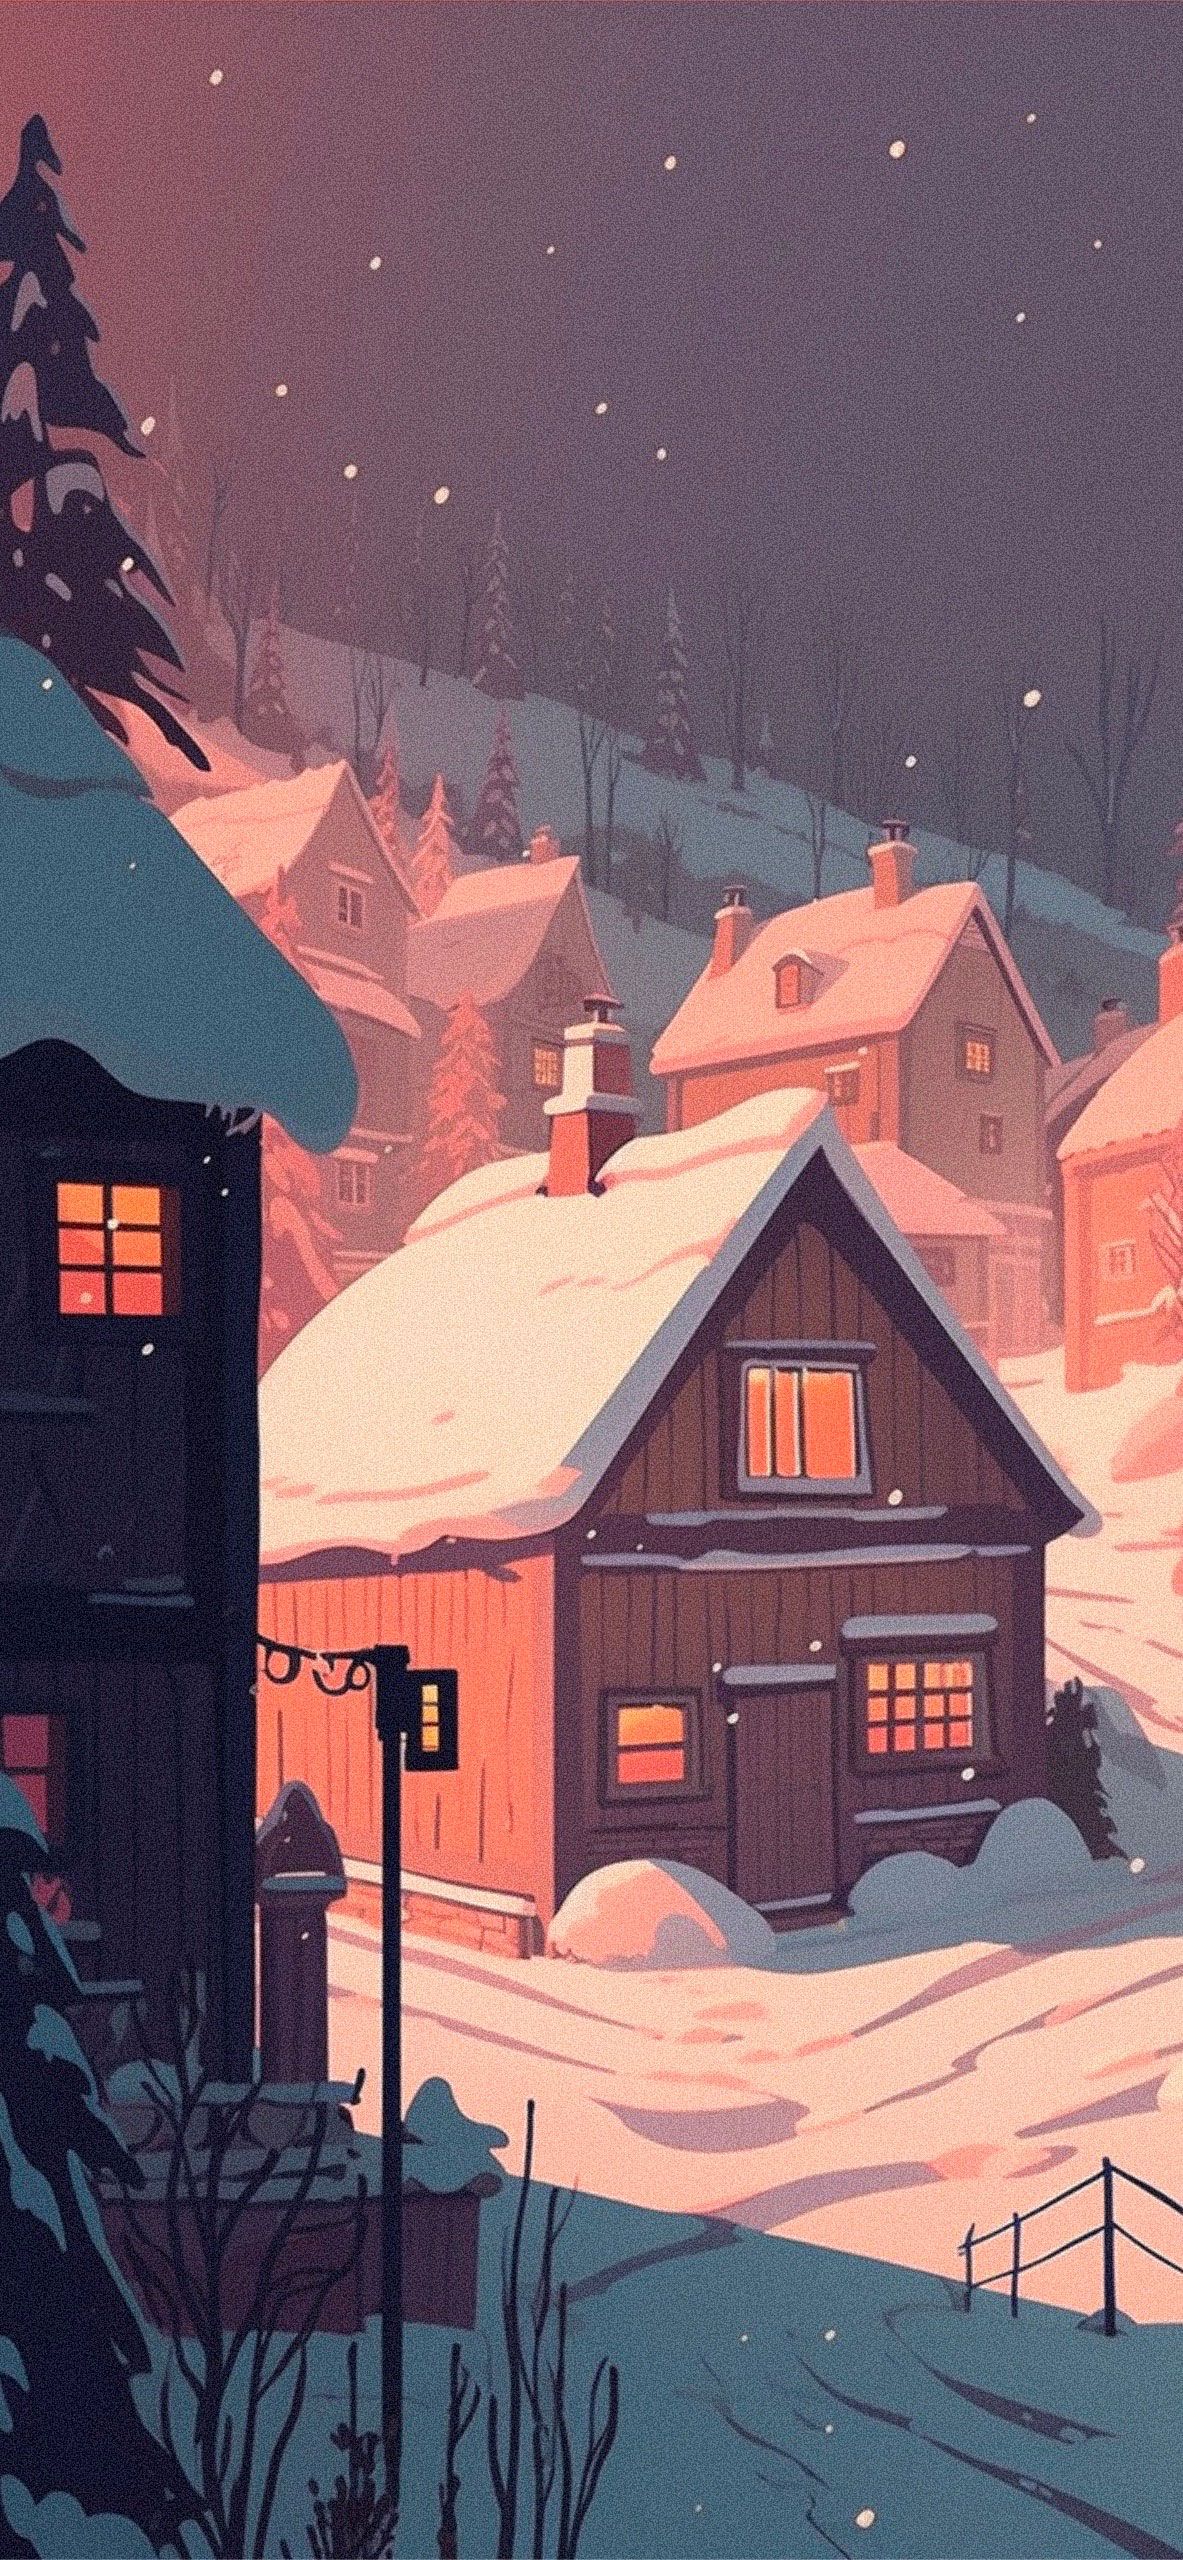 IPhone wallpaper of a cozy cabin in the woods with snow all around - Winter